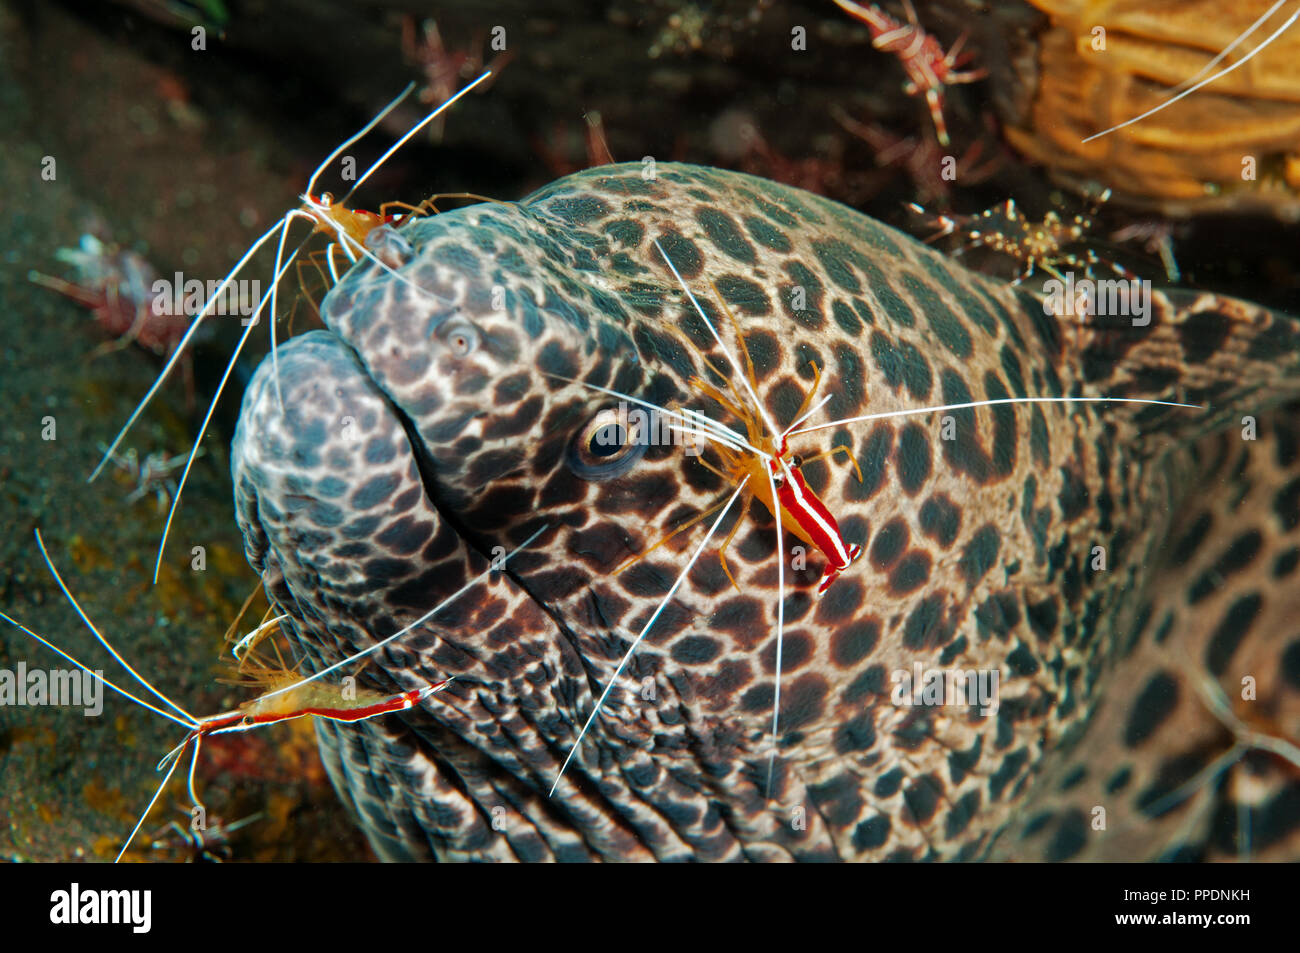 Honeycomb moray eel, Gymnothorax favagineus, being cleaned by cleaner shrimps, Lysmata amboinensis, Bali Indonesia. Stock Photo